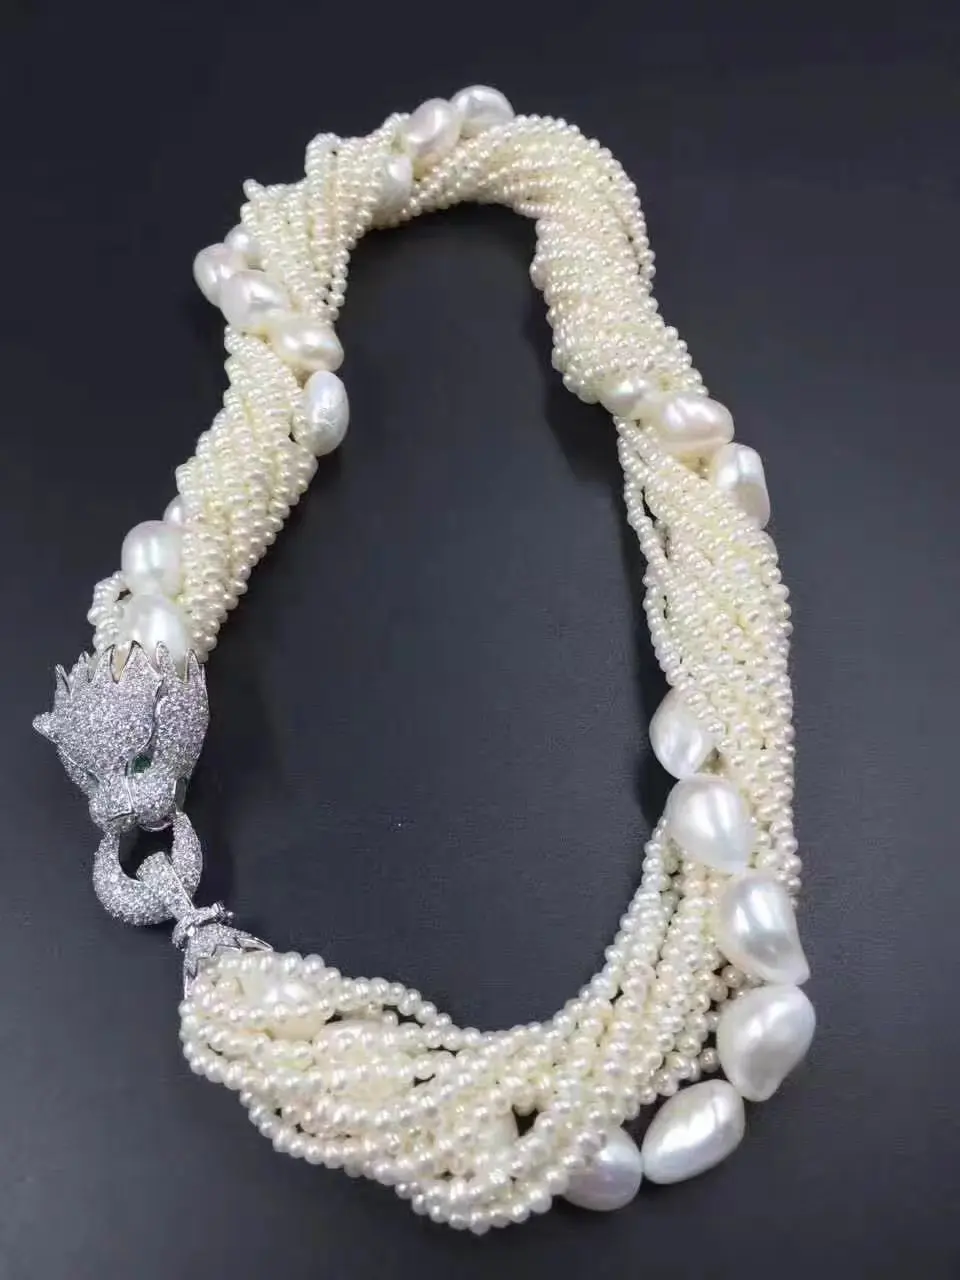 

10ROWS WHITE FRESHWATER PEARL NEAR ROUND 3-5MM NECKLACE 19INCH BRACELET LEOPARD CLASP WHOLESALE NATURE BEADS FPPJ